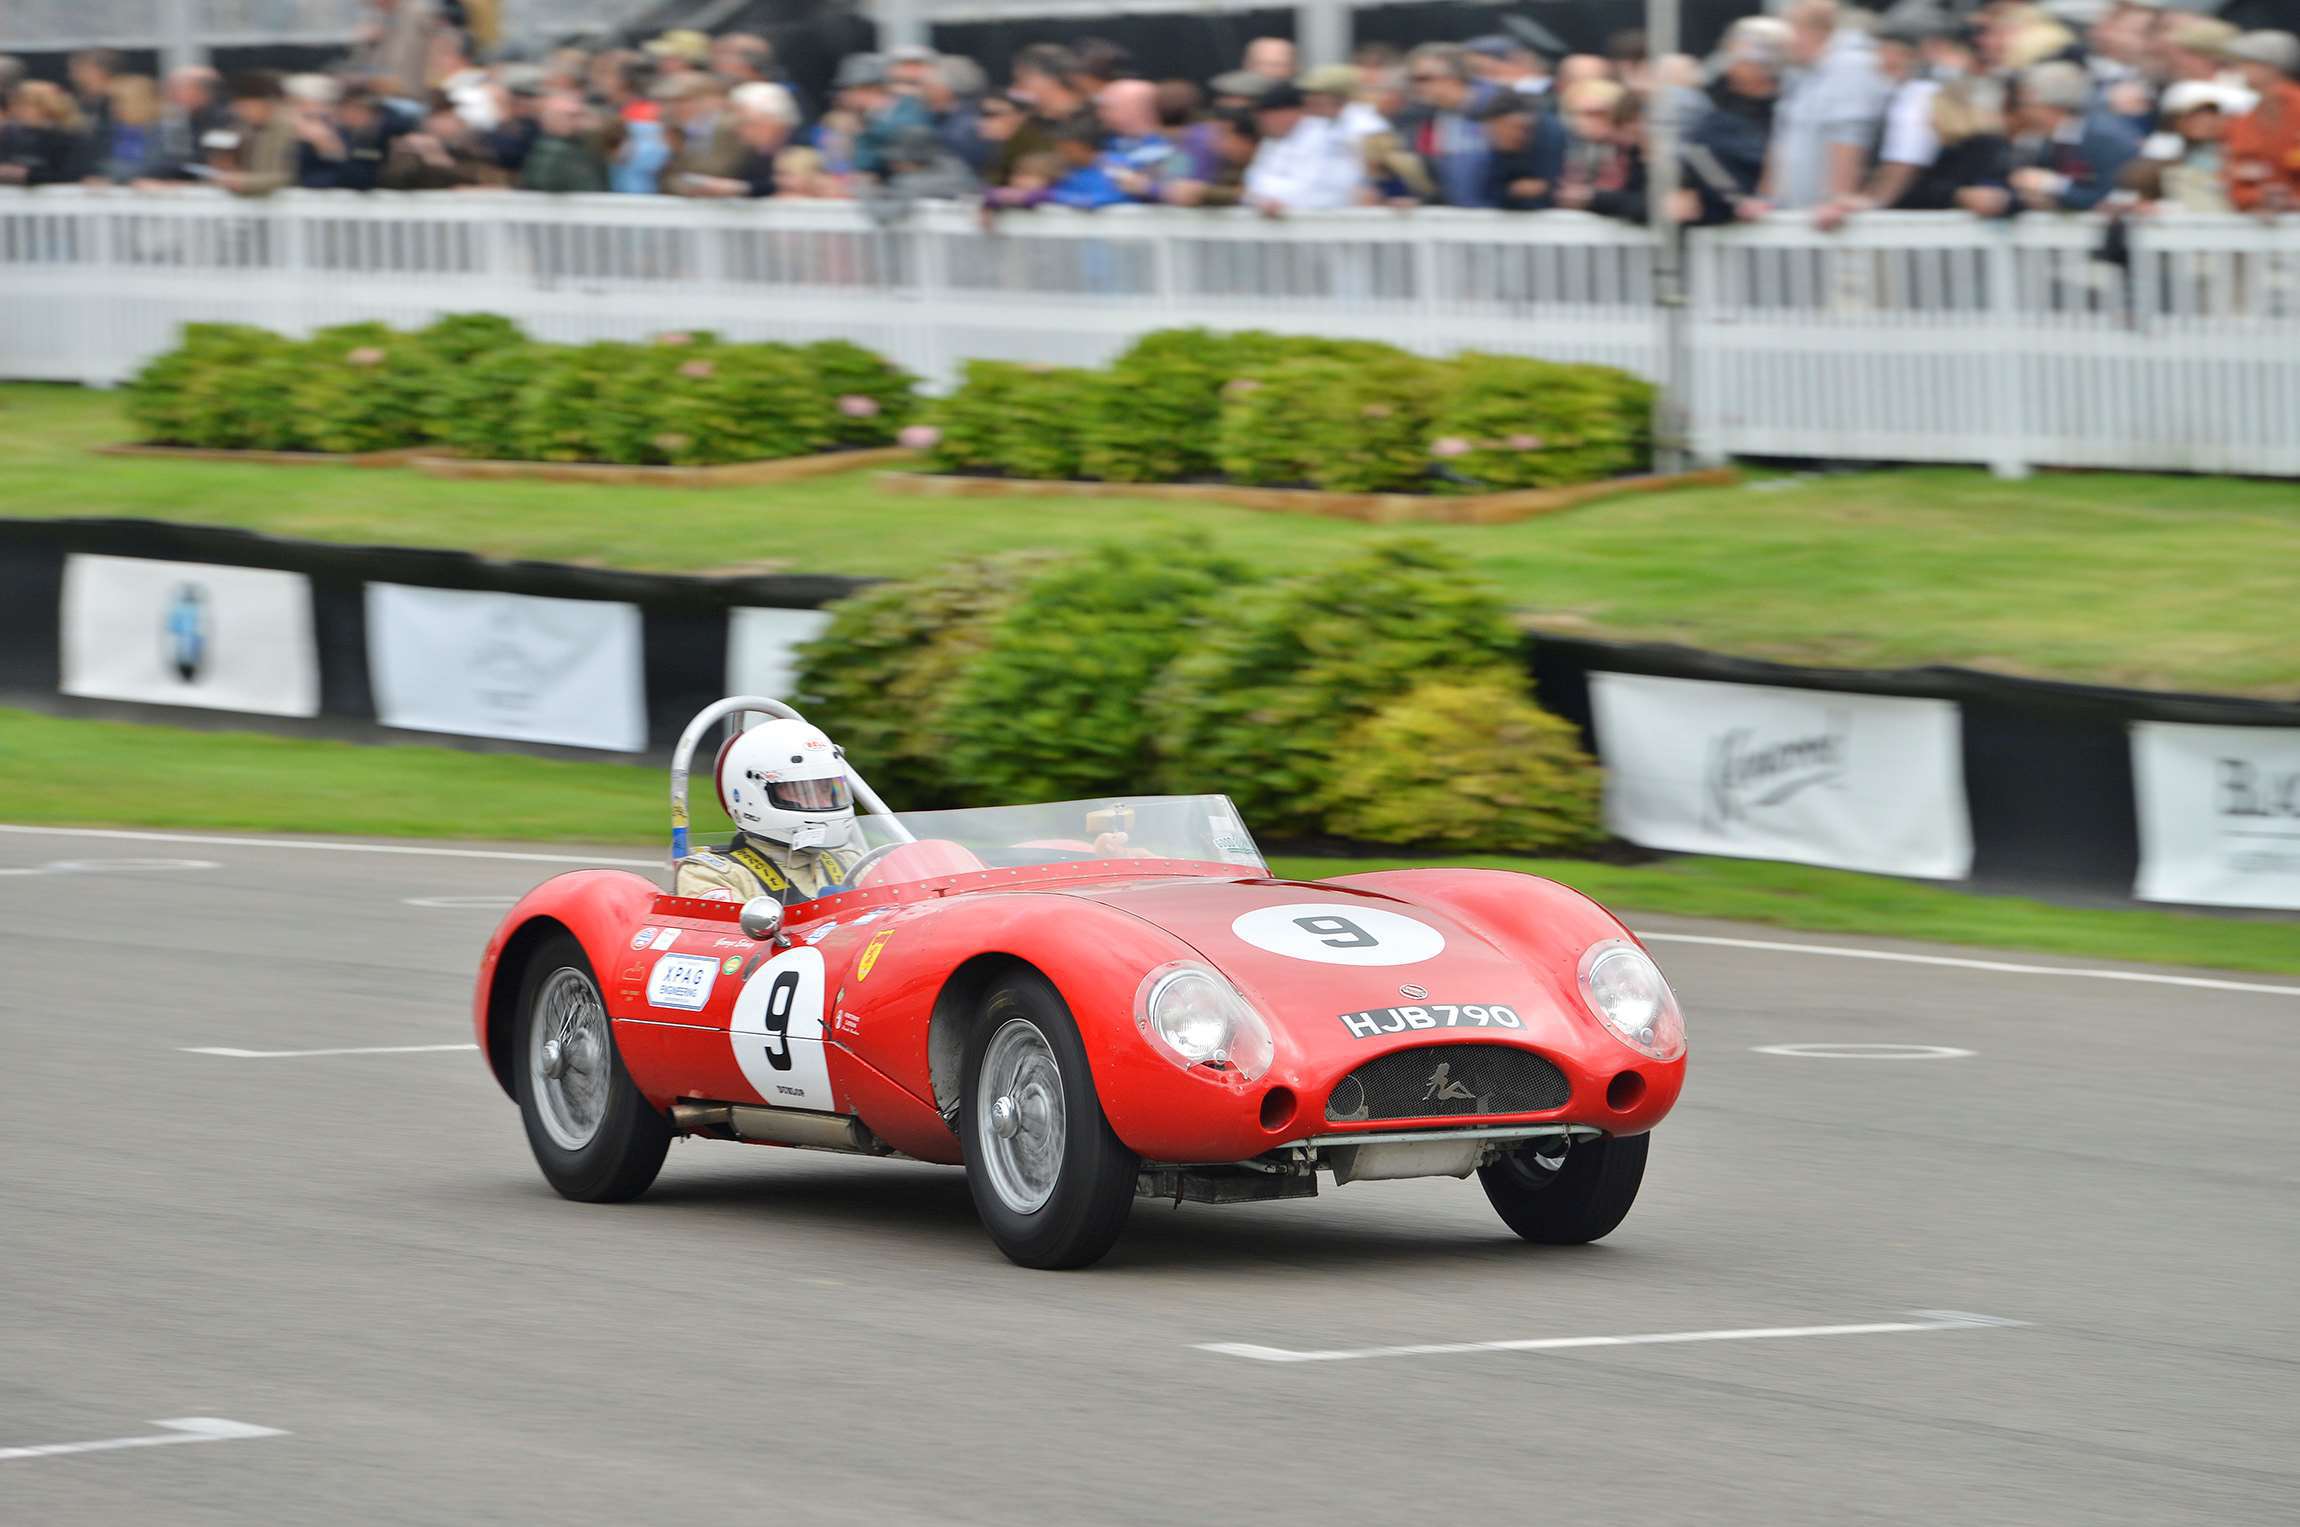 madgwick_cup_goodwood_revival_2013_23081602.jpg